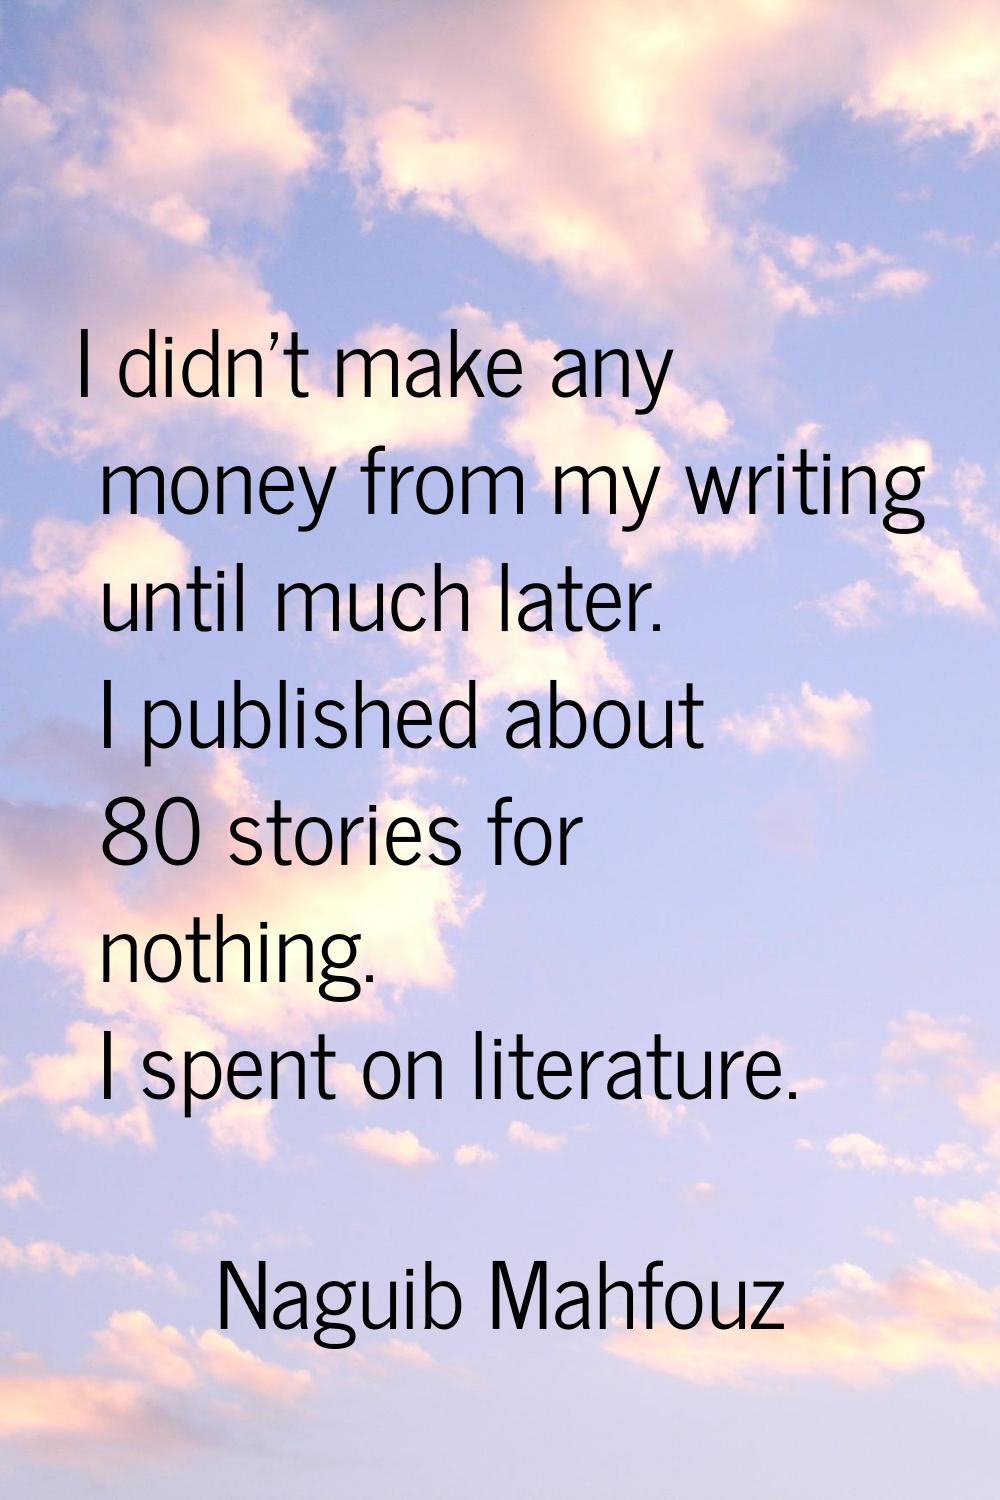 I didn't make any money from my writing until much later. I published about 80 stories for nothing.